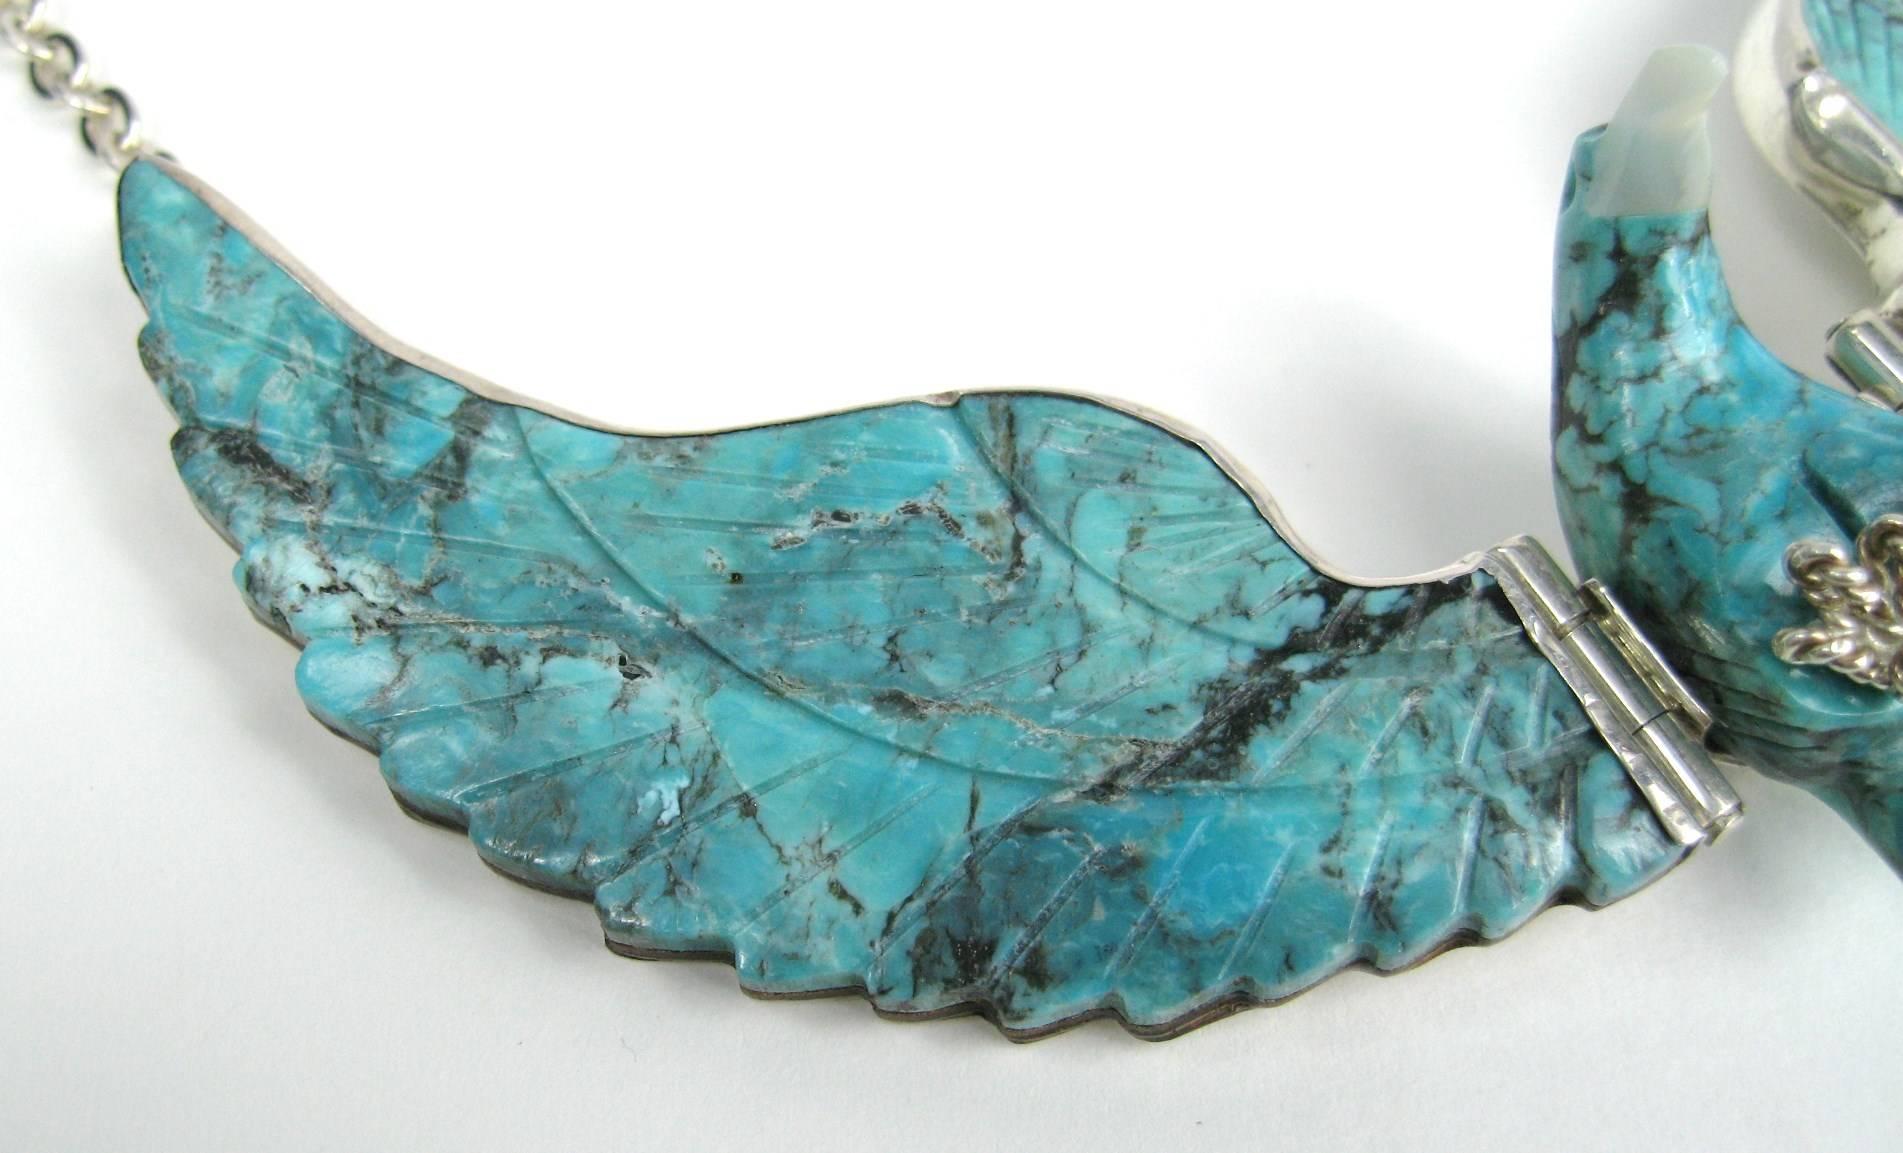 Massive at 4.75 inch wing span on this Turquoise Eagle Navajo Made of stunning carved Turquoise backed on sterling. Made by Sheila Tso Hinged wings Drops down 22 inches This is out of a massive collection of Hopi, Zuni, Navajo, Southwestern and